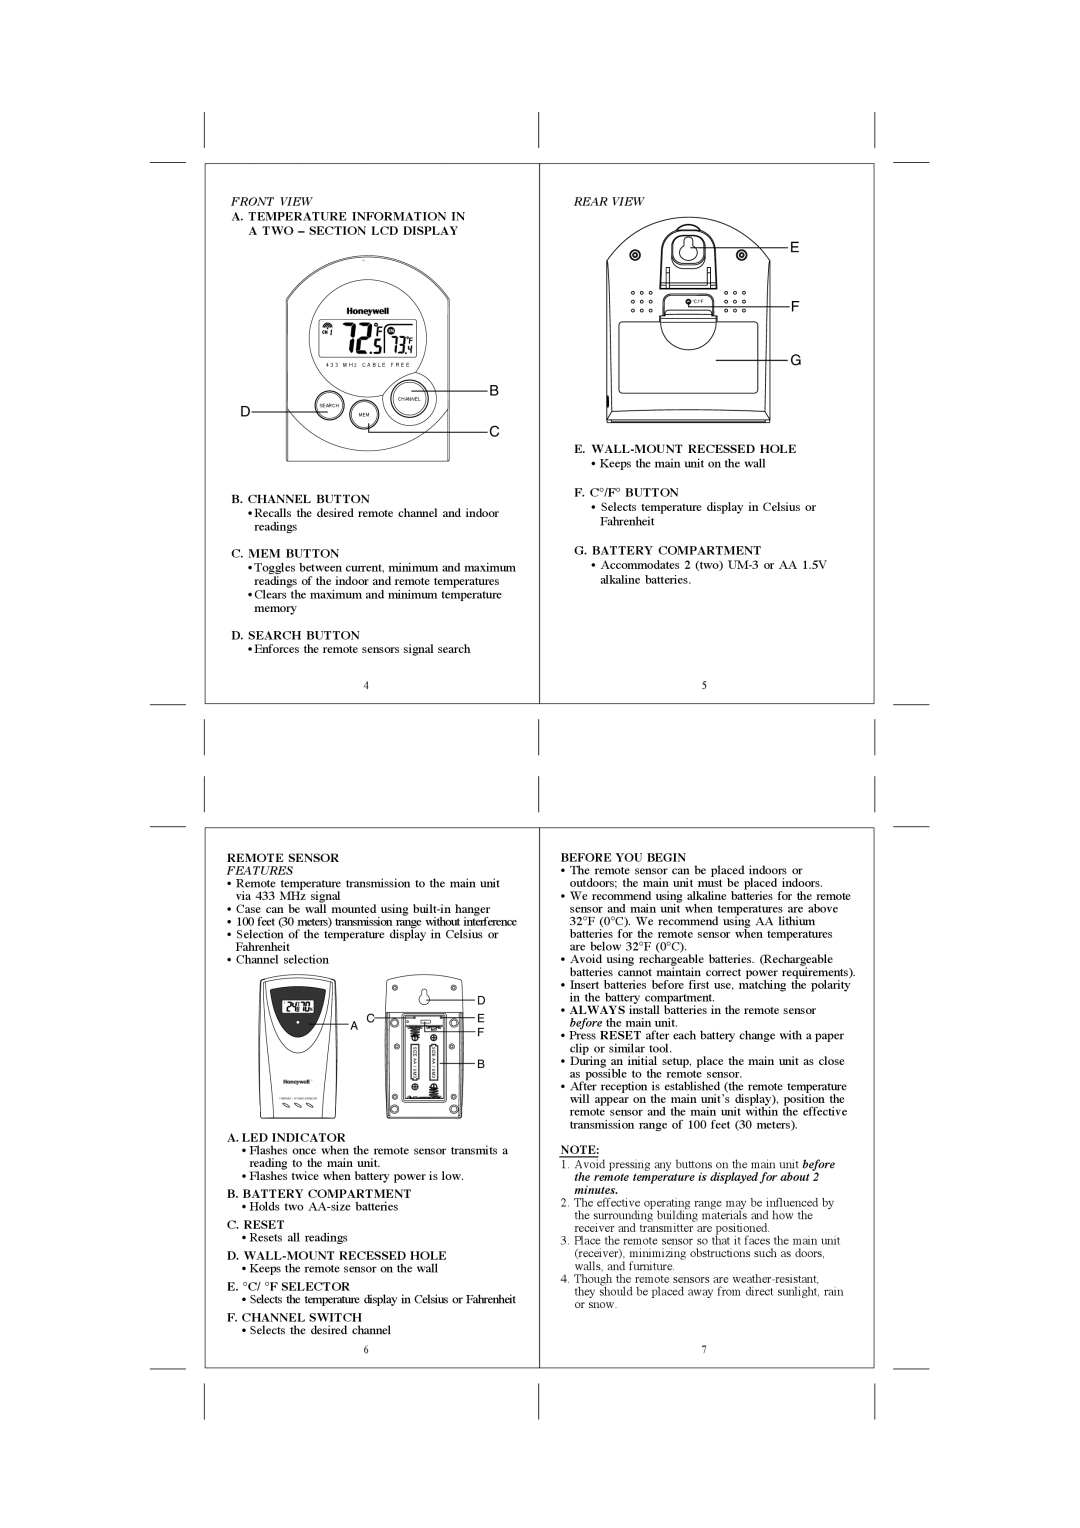 Honeywell TS03C, TM004 user manual Front View, Rear View, Features 